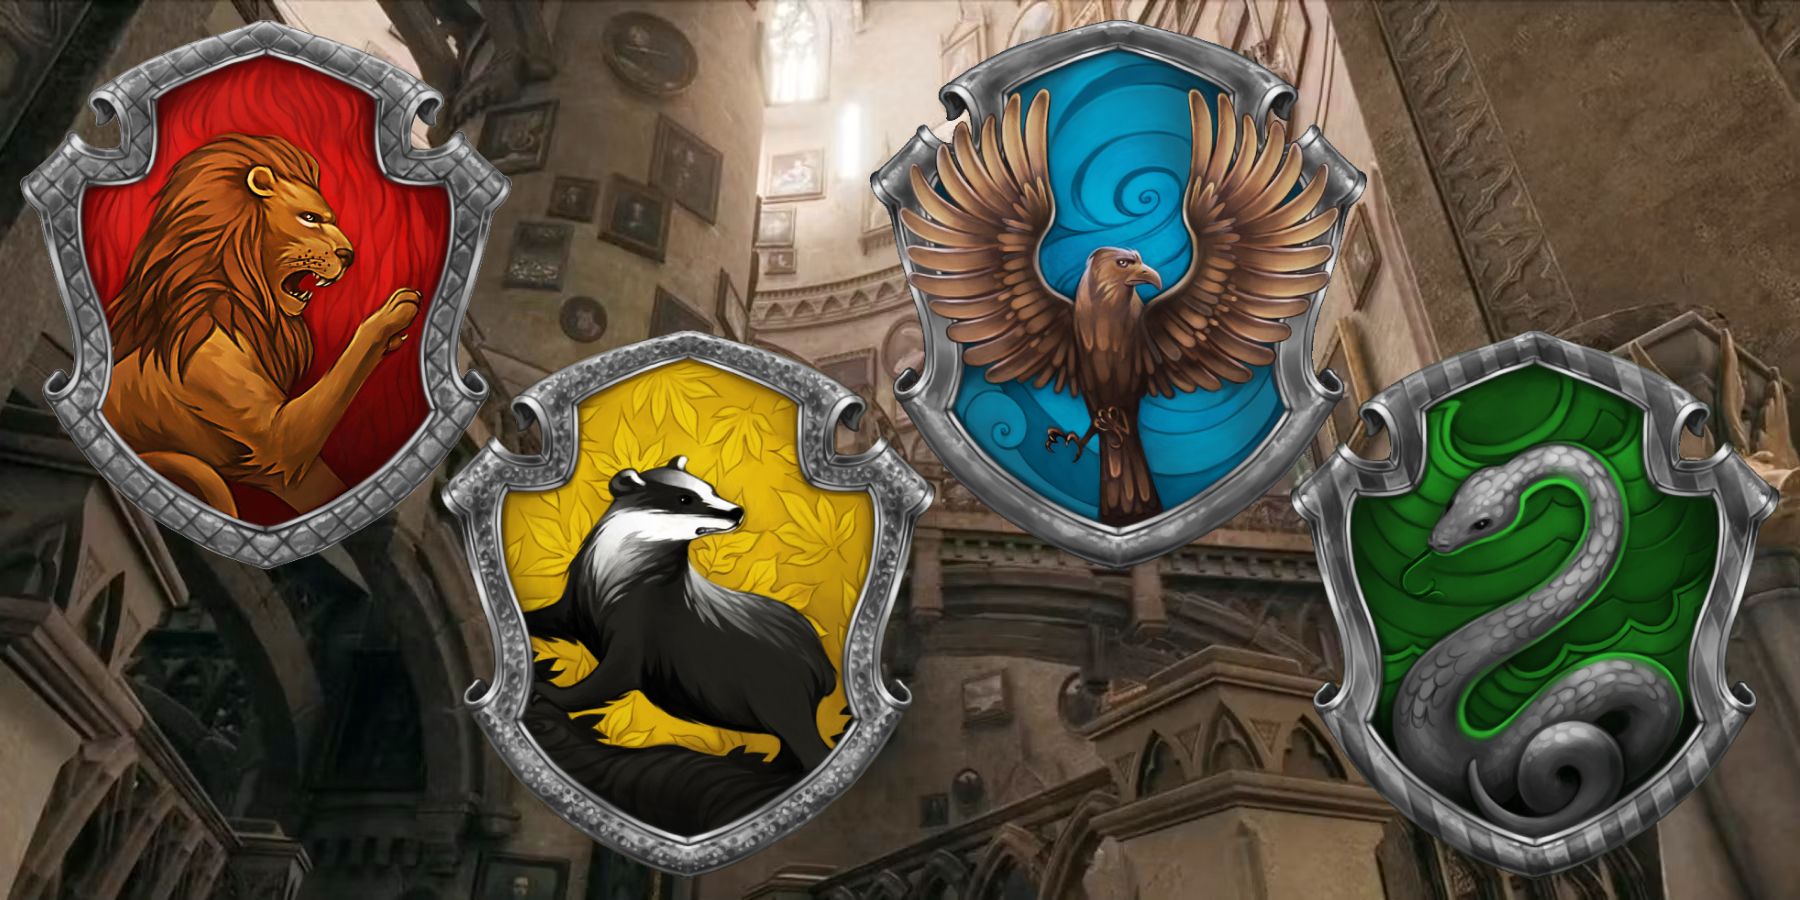 Hogwarts' four house crests arranged in front of a screenshot of the castle's Grand Staircase in Hogwarts Legacy.